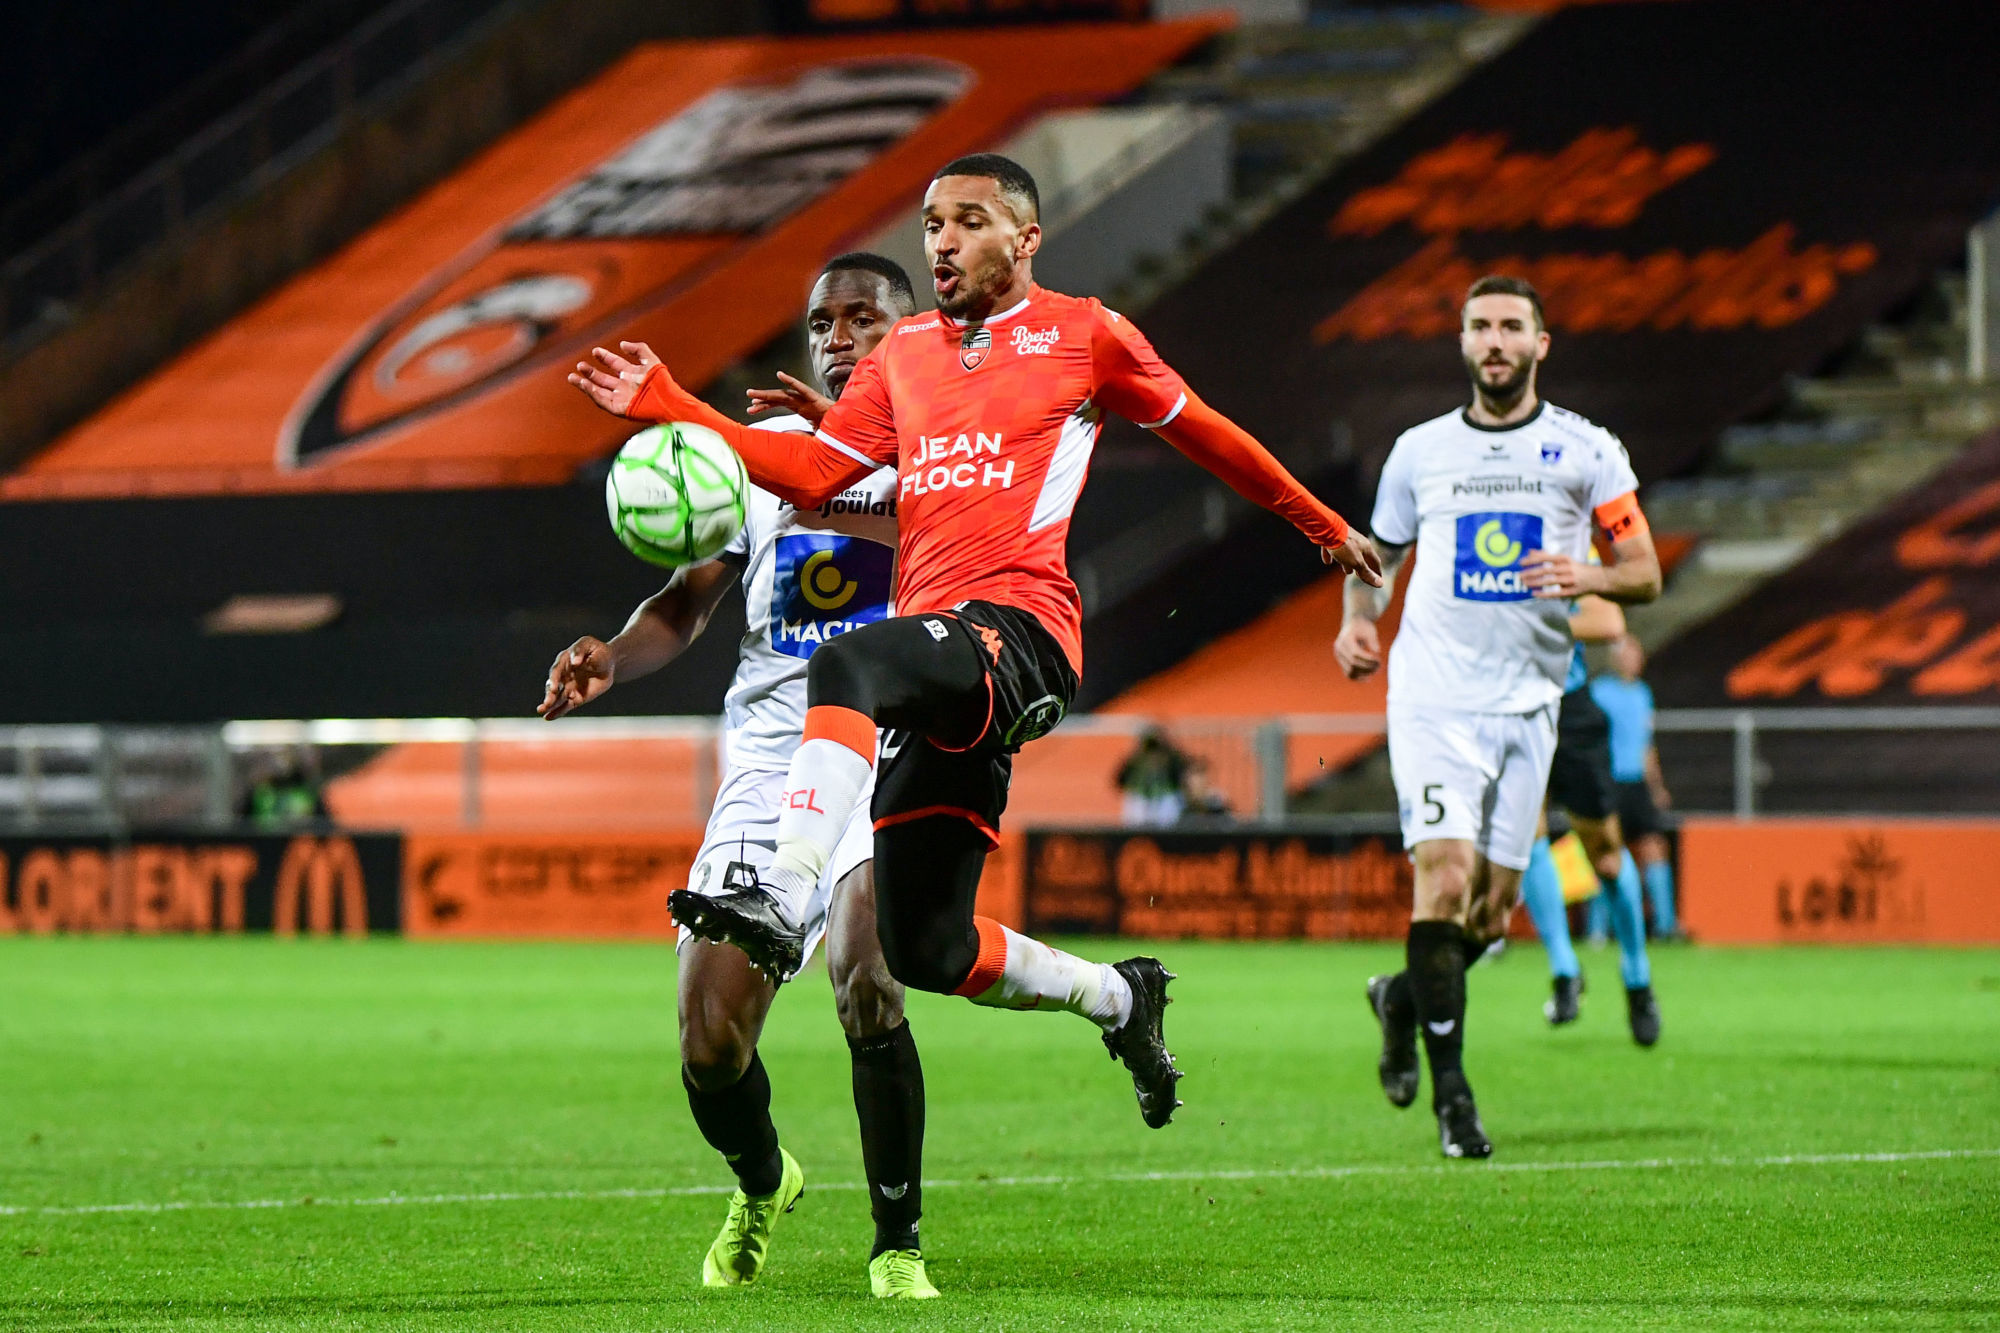 Sylvain MARVEAUX of Lorient and Guy Marcelin KILAMA of Niort during the Ligue 2 match between Lorient and Niort on November 8, 2019 in Lorient, France. (Photo by Anthony Dibon/Icon Sport) - Sylvain MARVEAUX - Guy-Marcelin KILAMA - Capitainerie du Port de Lorient La Base - Lorient (France)